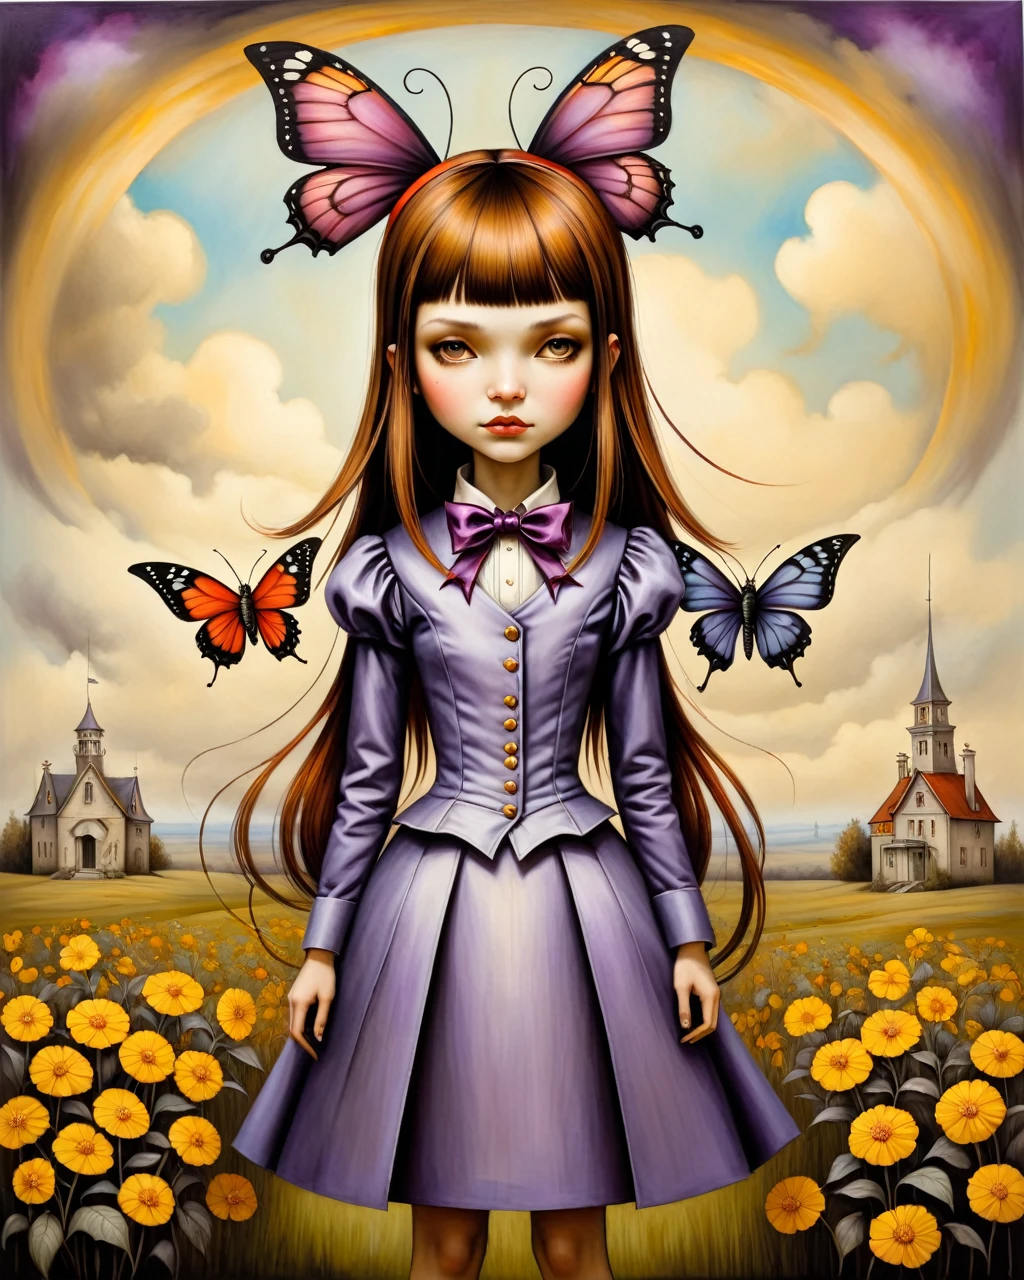 VIOLET BAUDELAIRE LEMONY SNICKET A SERIES OF UNFORTUNATE EVENTS GIRL WITH LONG straight BROWN HAIR PURPLE RIBBON BLUNT BANGS EDWARDIAN VICTORIAN GOTHIC STEAMPUNK INVENTOR origami style in the style of esao andrews,esao andrews style,esao andrews art,esao andrewsa painting of a girl gothic style of esao andrews, andrews esao artstyle, inspired by Esao Andrews, esao andrews ornate, by Esao Andrews, esao andrews, inspired by ESAO, by ESAO,  earley, shrubs and flowers esao andrews, benjamin lacombe, 1girl, bug in the style of esao andrews, esao andrews . paper art, pleated paper, folded, origami art, pleats, cut and fold, centered composition